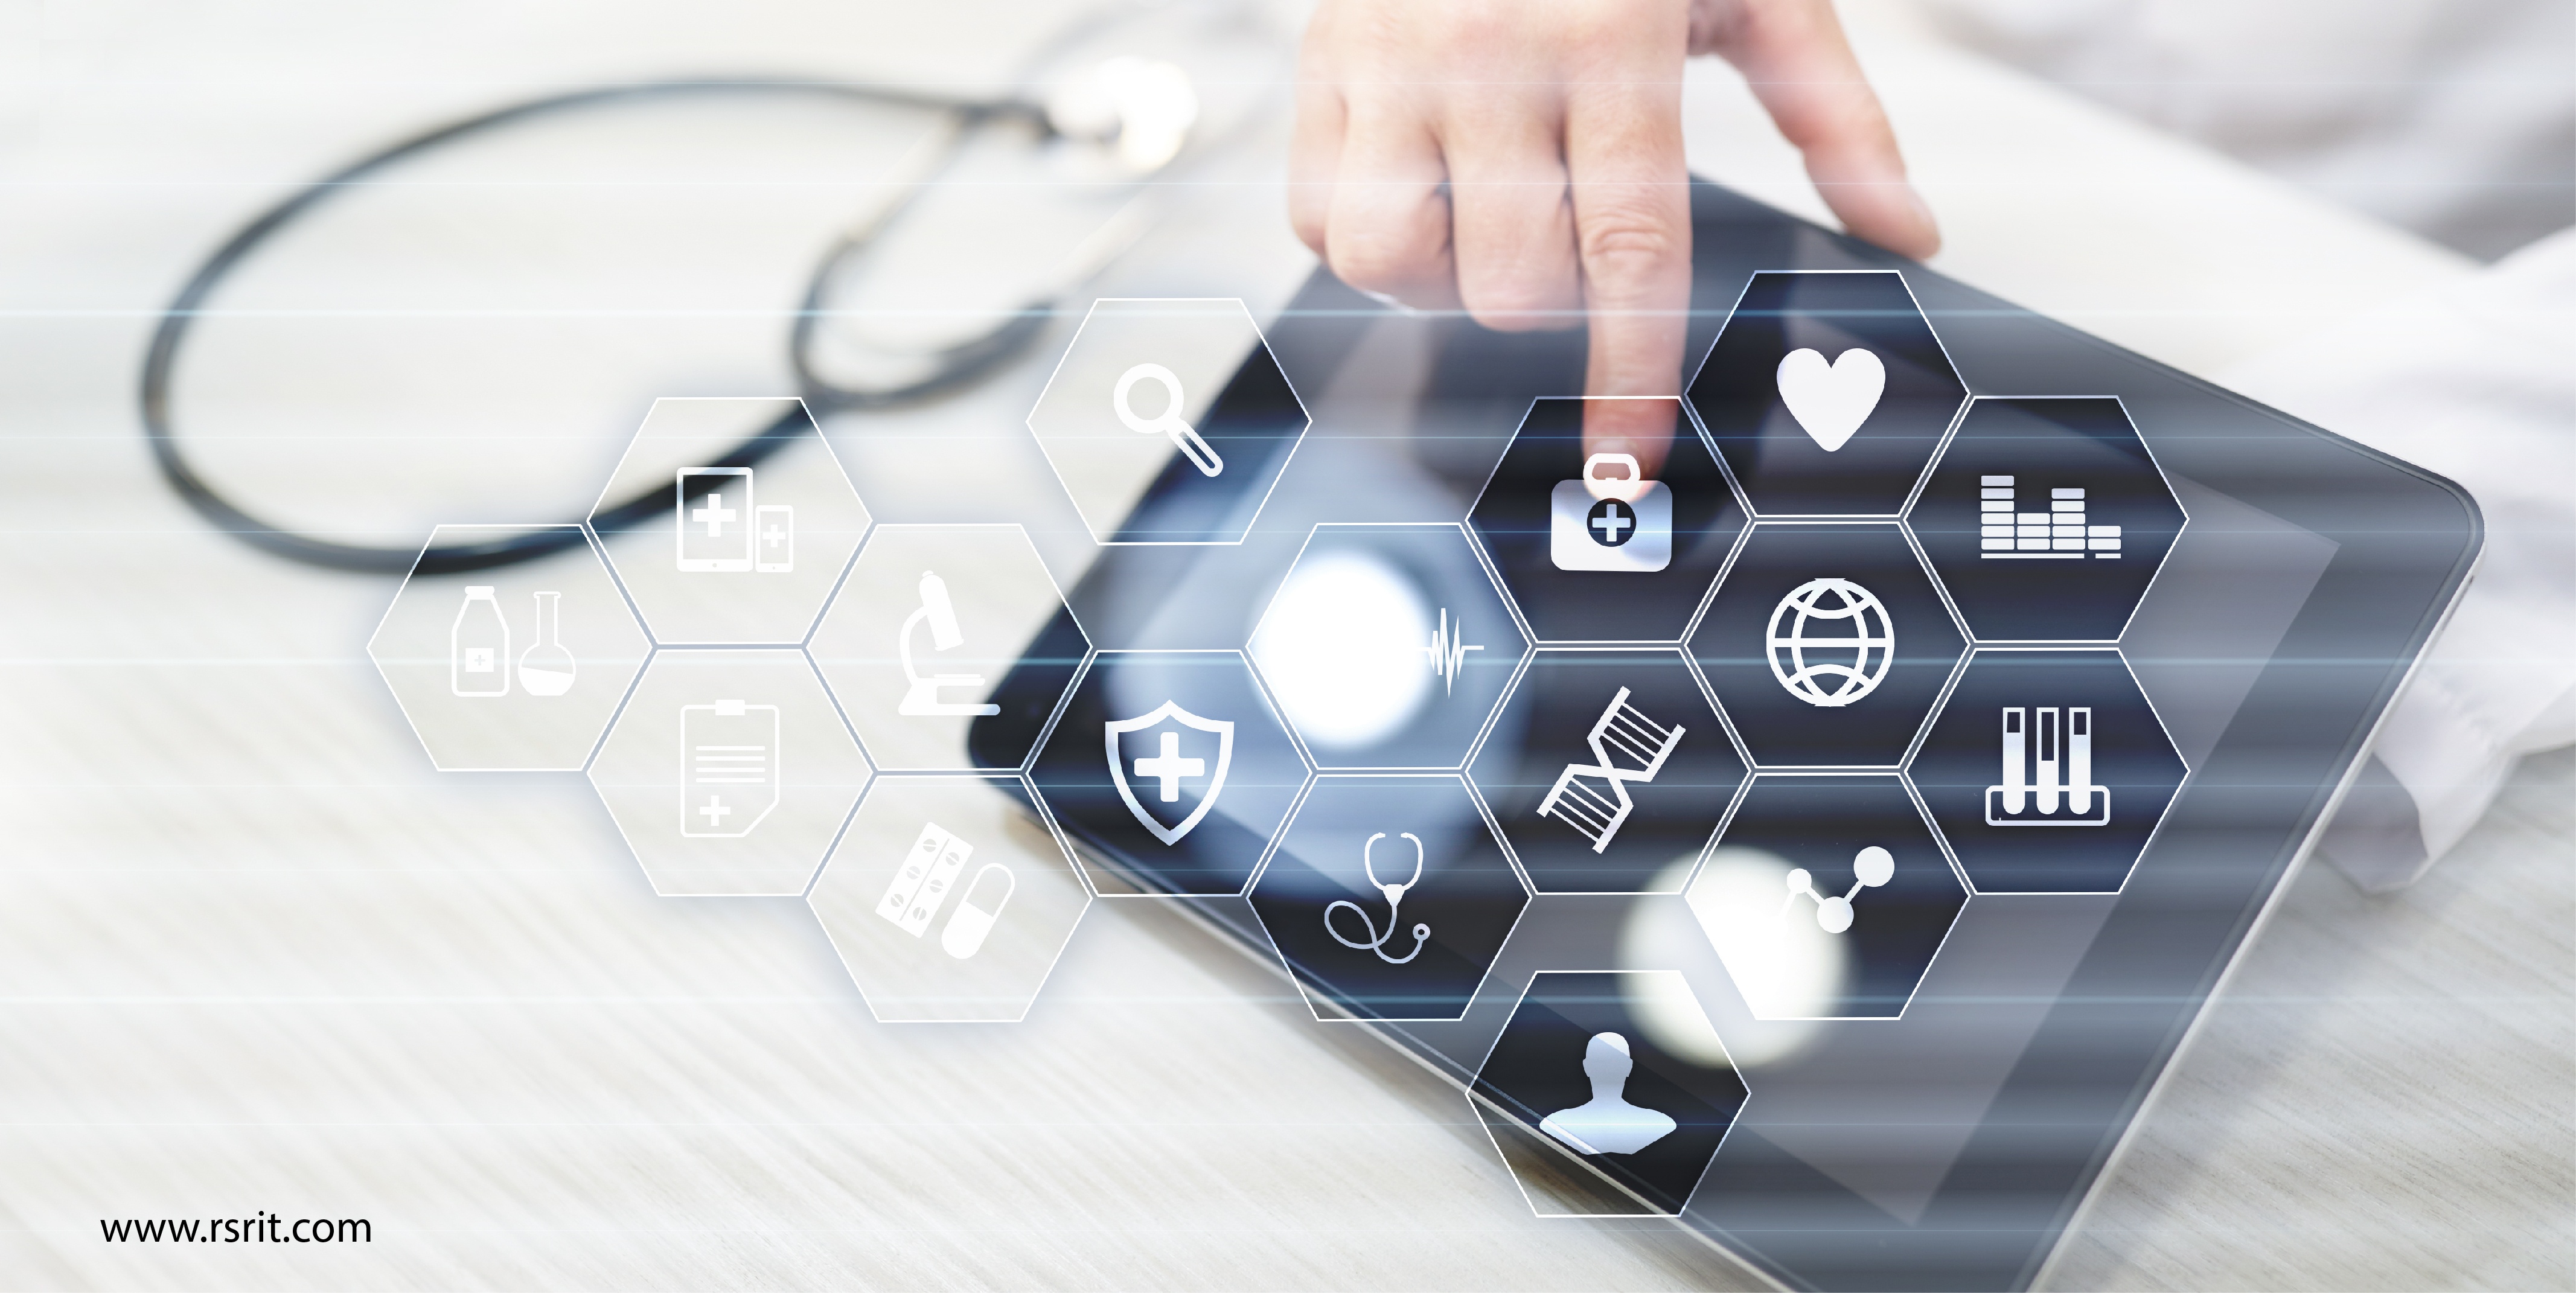 5 Reasons Healthcare Organizations need an IoT Strategy